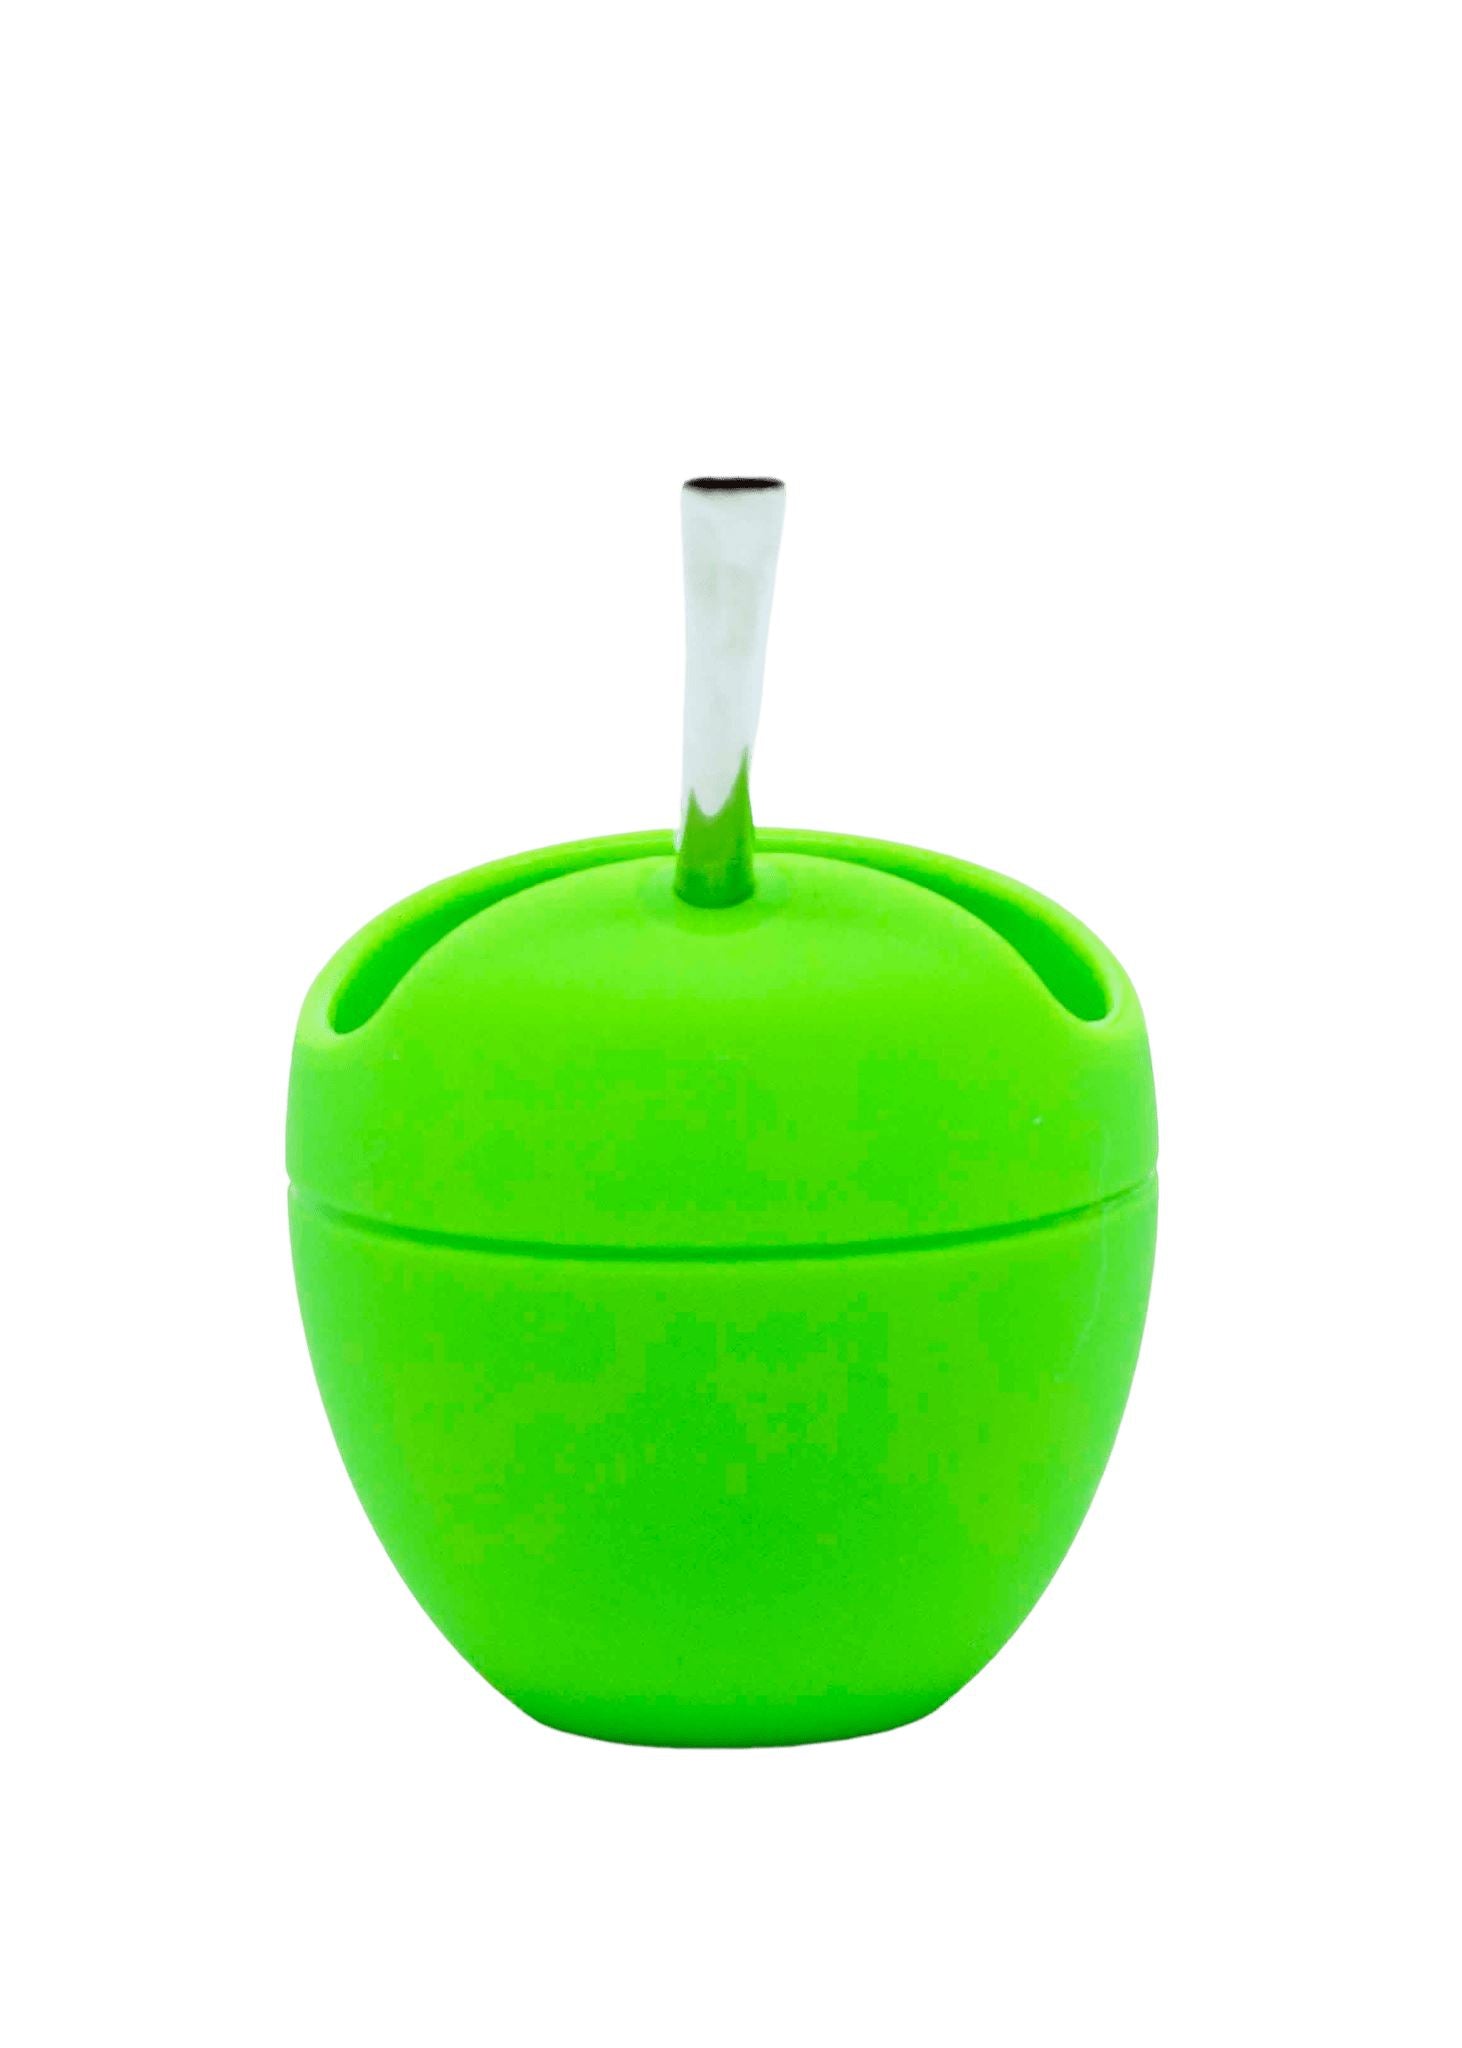 Mateo Silicone Mate Gourd with Straw - Green (Mate and Bombilla) Mates Hispanic Pantry 